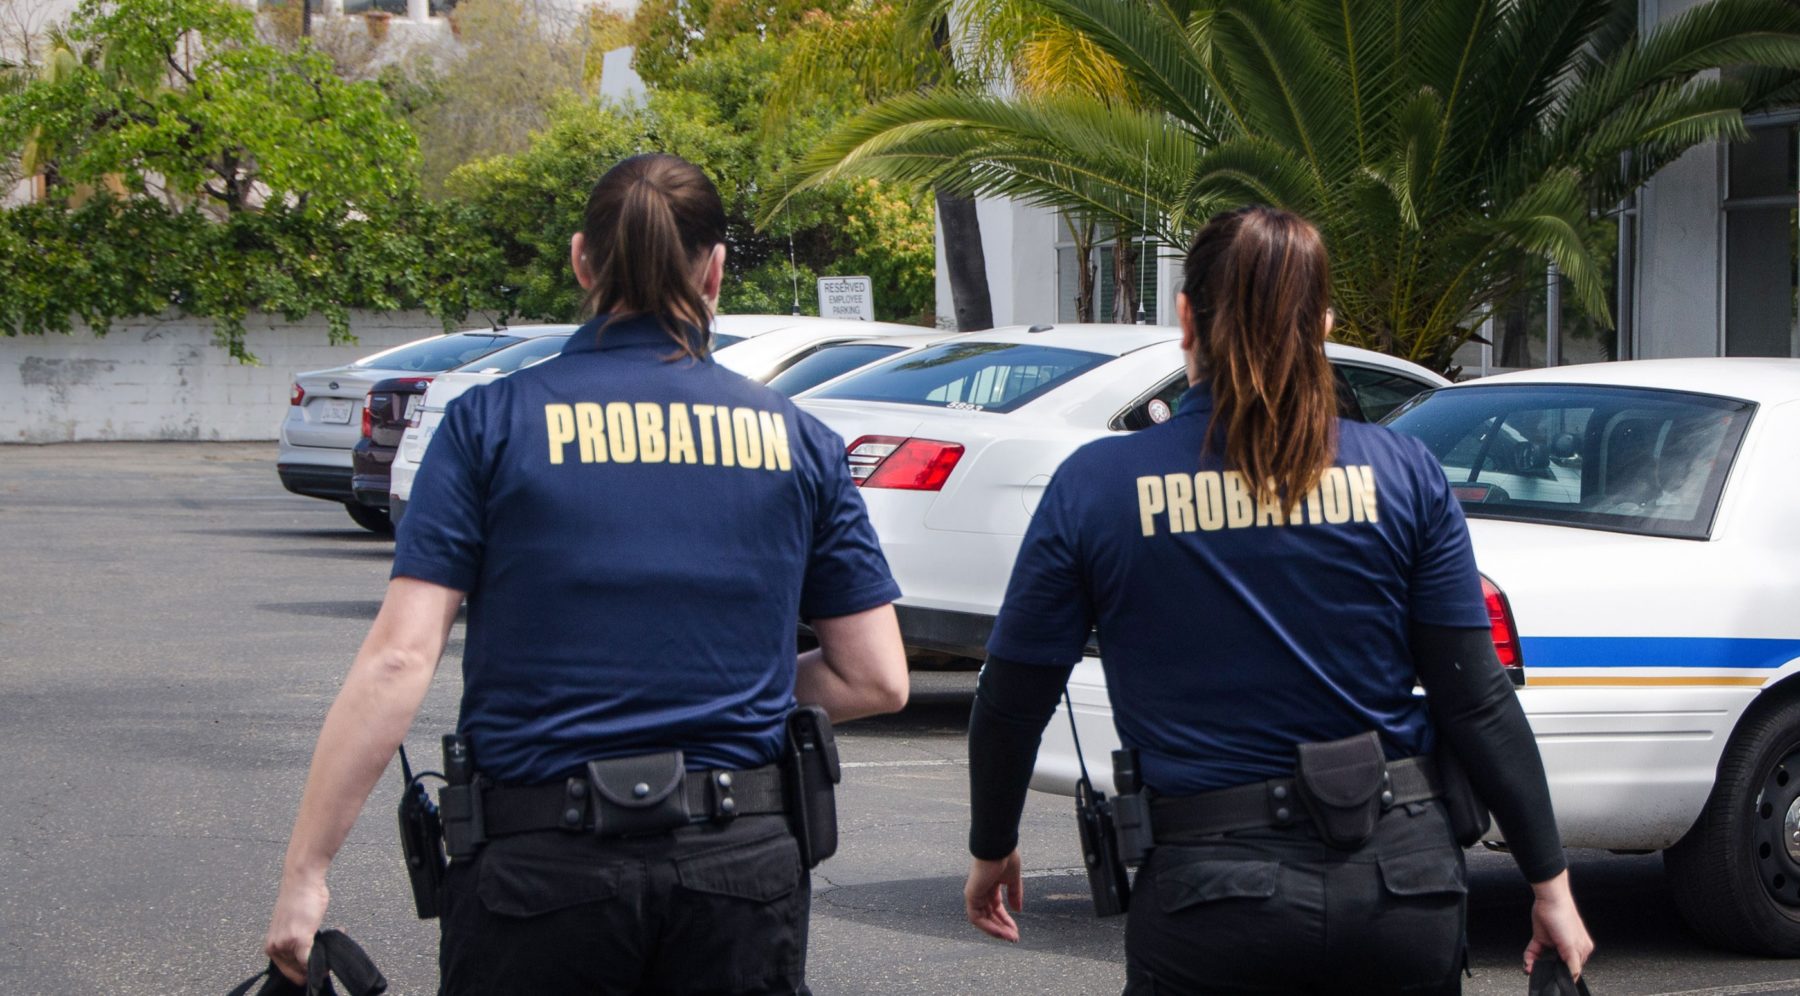 Probation Officers Should Never Direct Medical Care for People With OUD